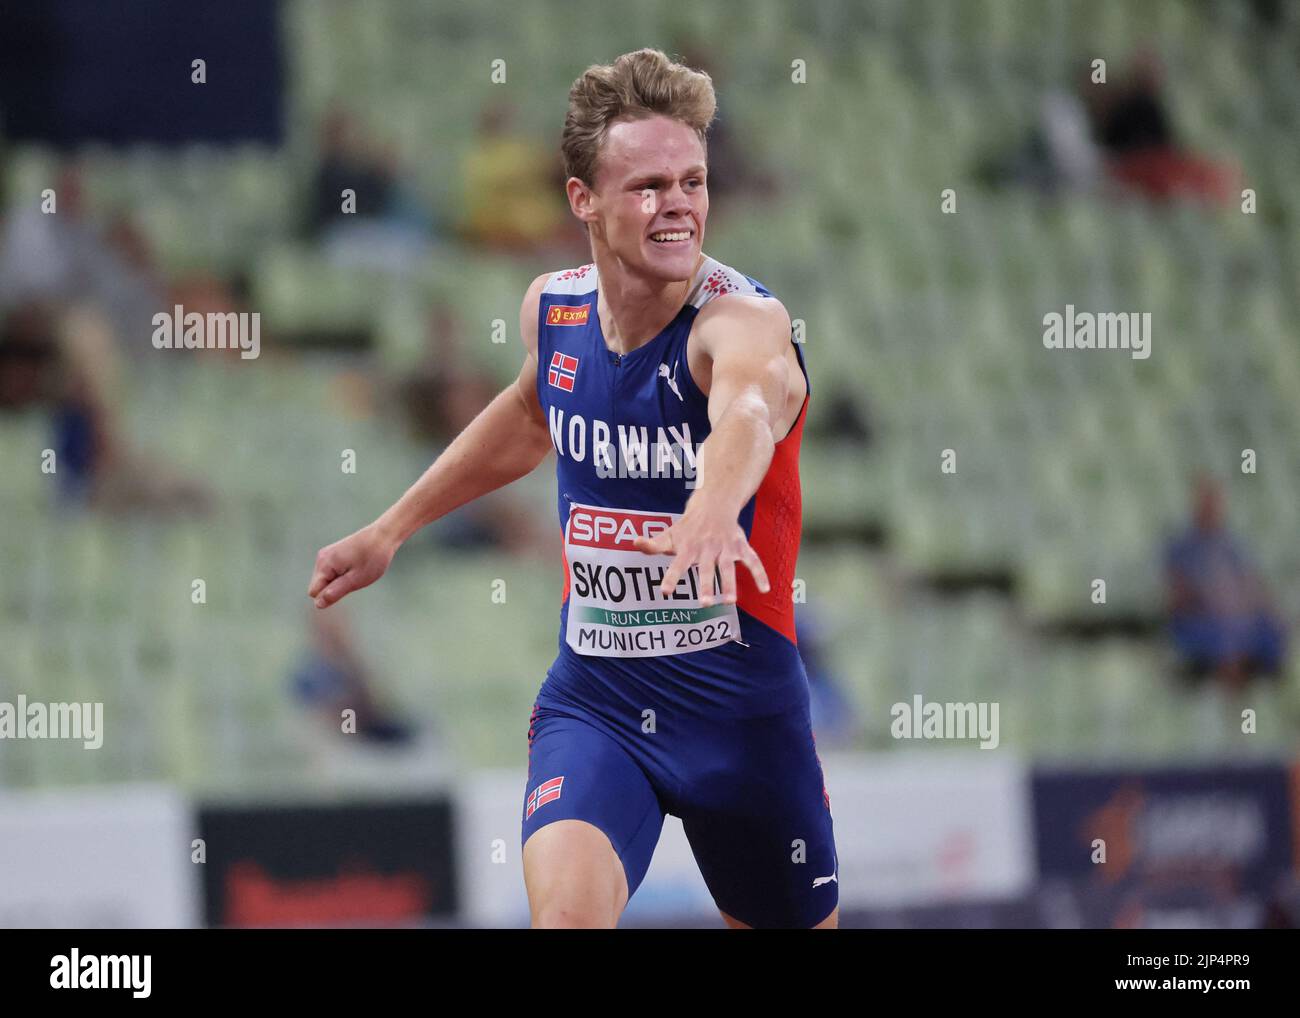 Athletics - 2022 European Championships - Olympiastadion, Munich, Germany - August 15, 2022 Norway's Sander Skotheim in action during the men's decathlon 400m heats REUTERS/Wolfgang Rattay Stock Photo